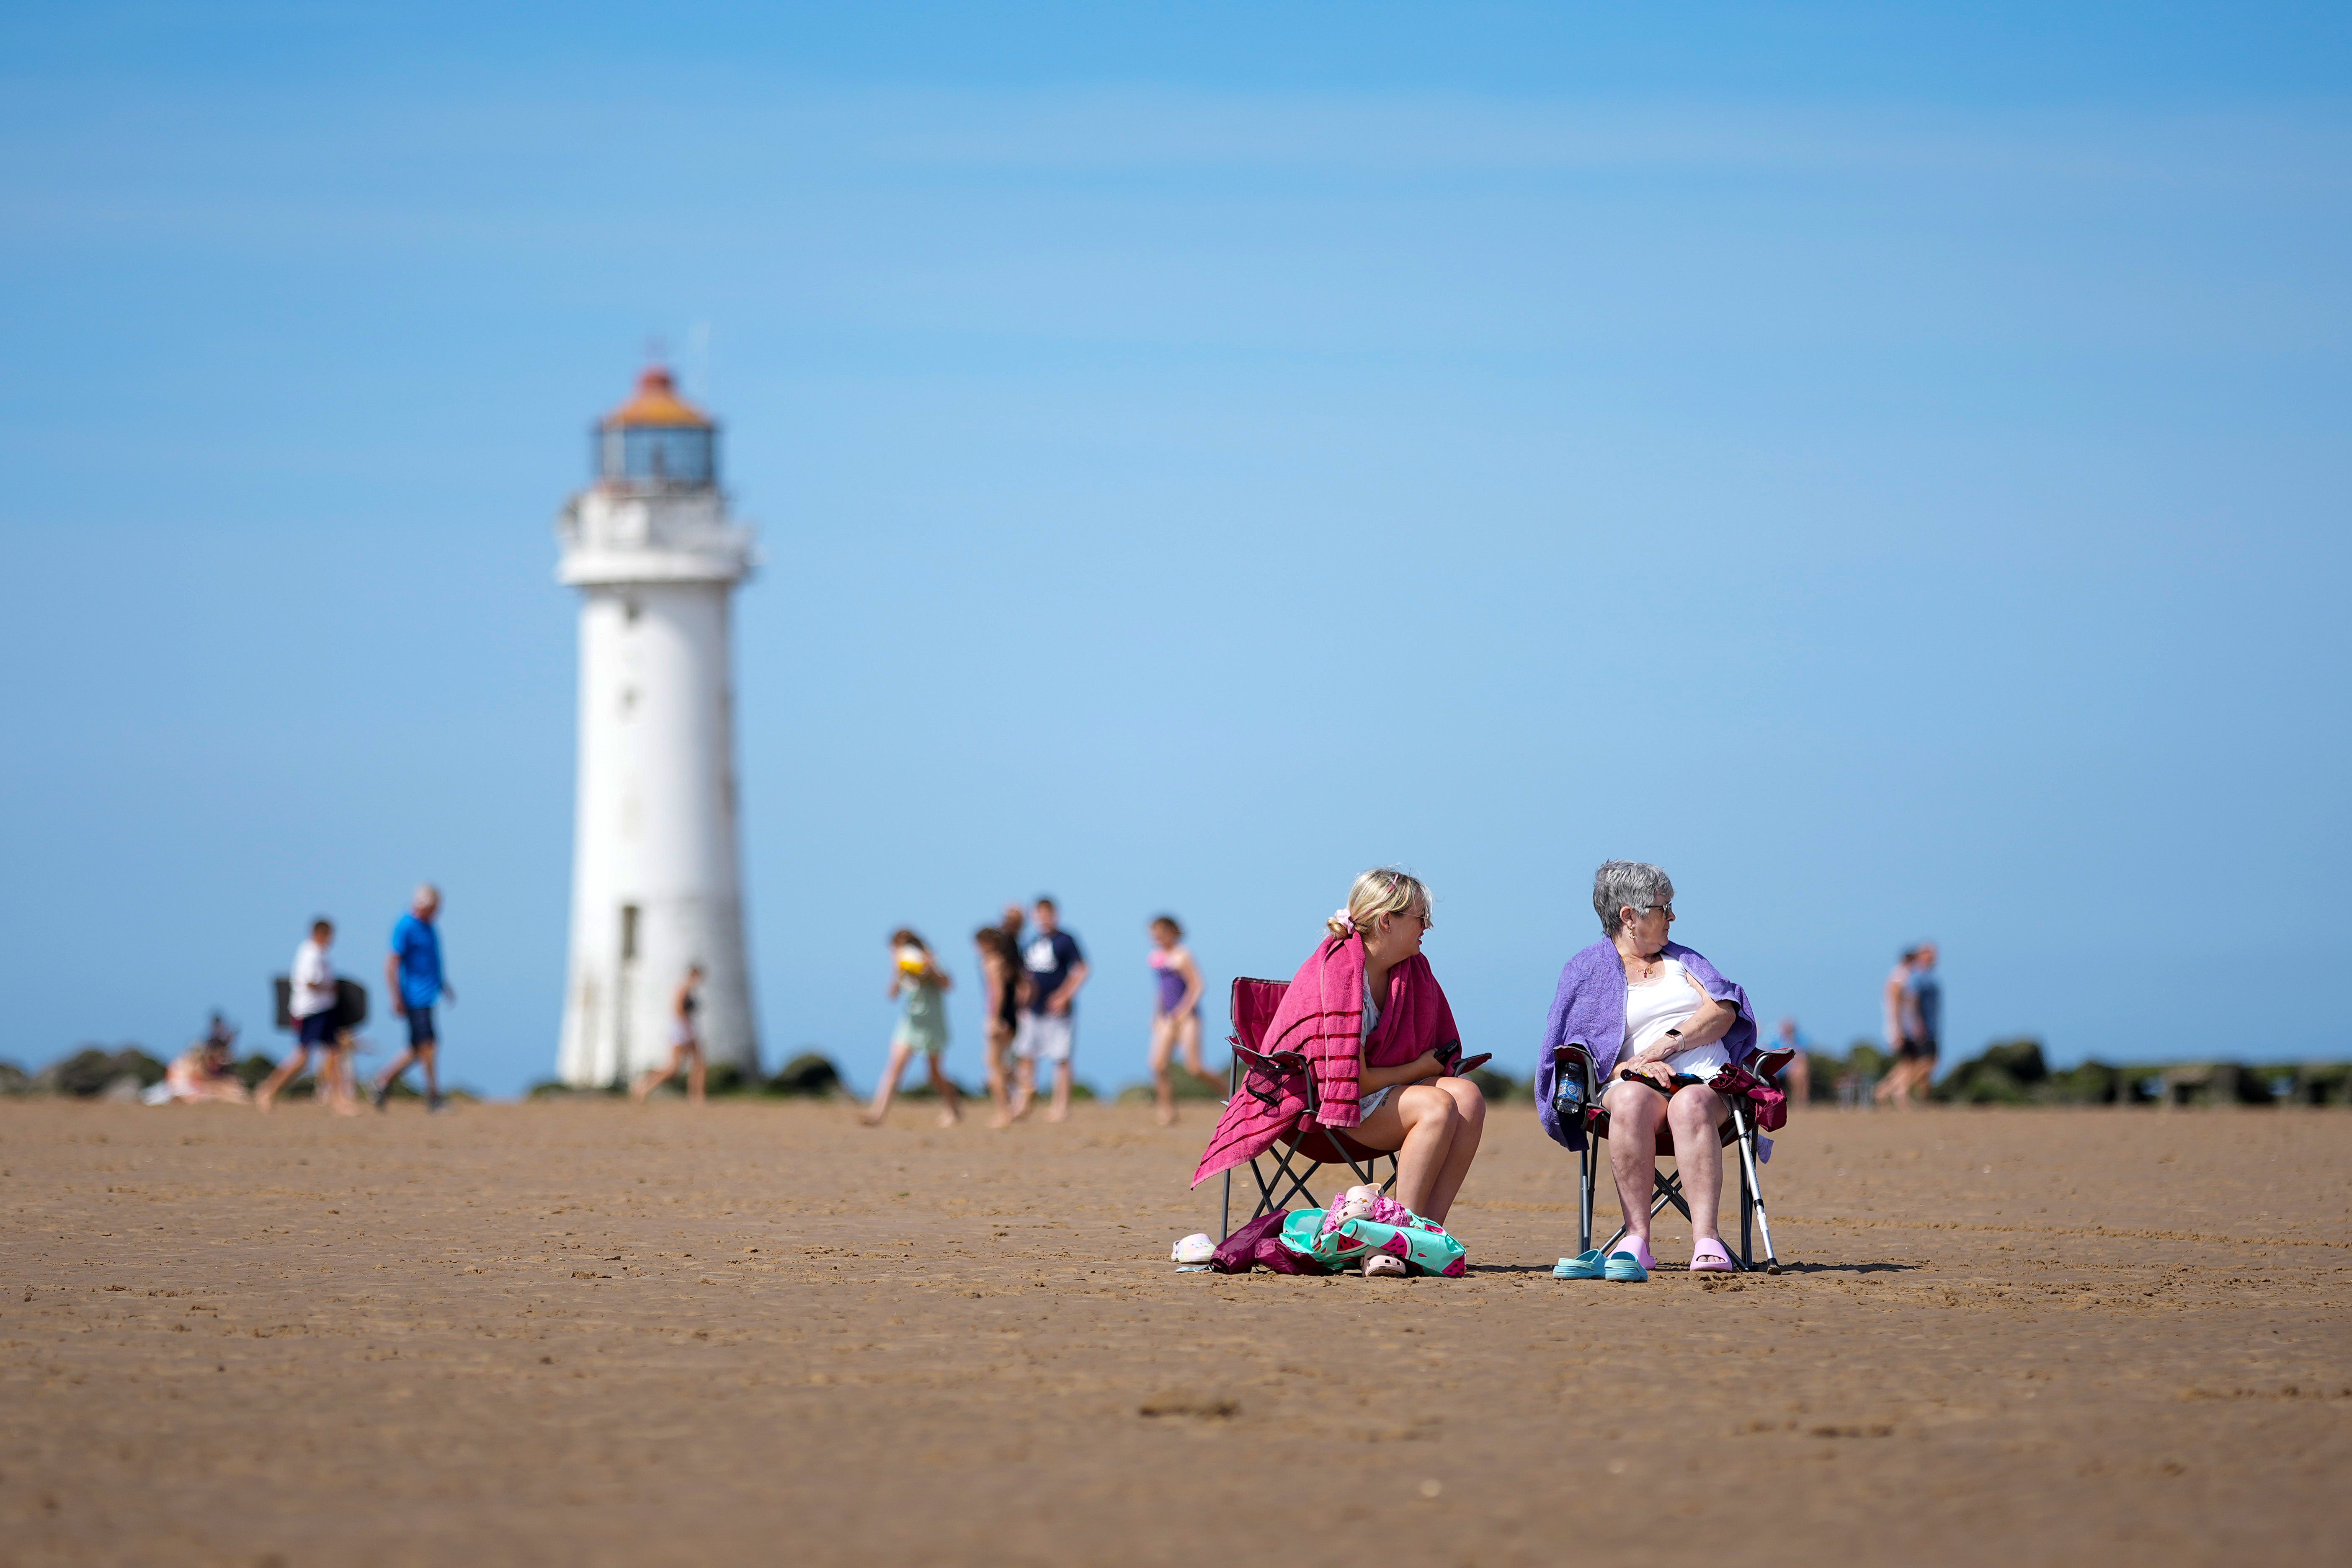 UK weather: Britain to be hotter than Athens on Easter Sunday as temperatures hit 18C